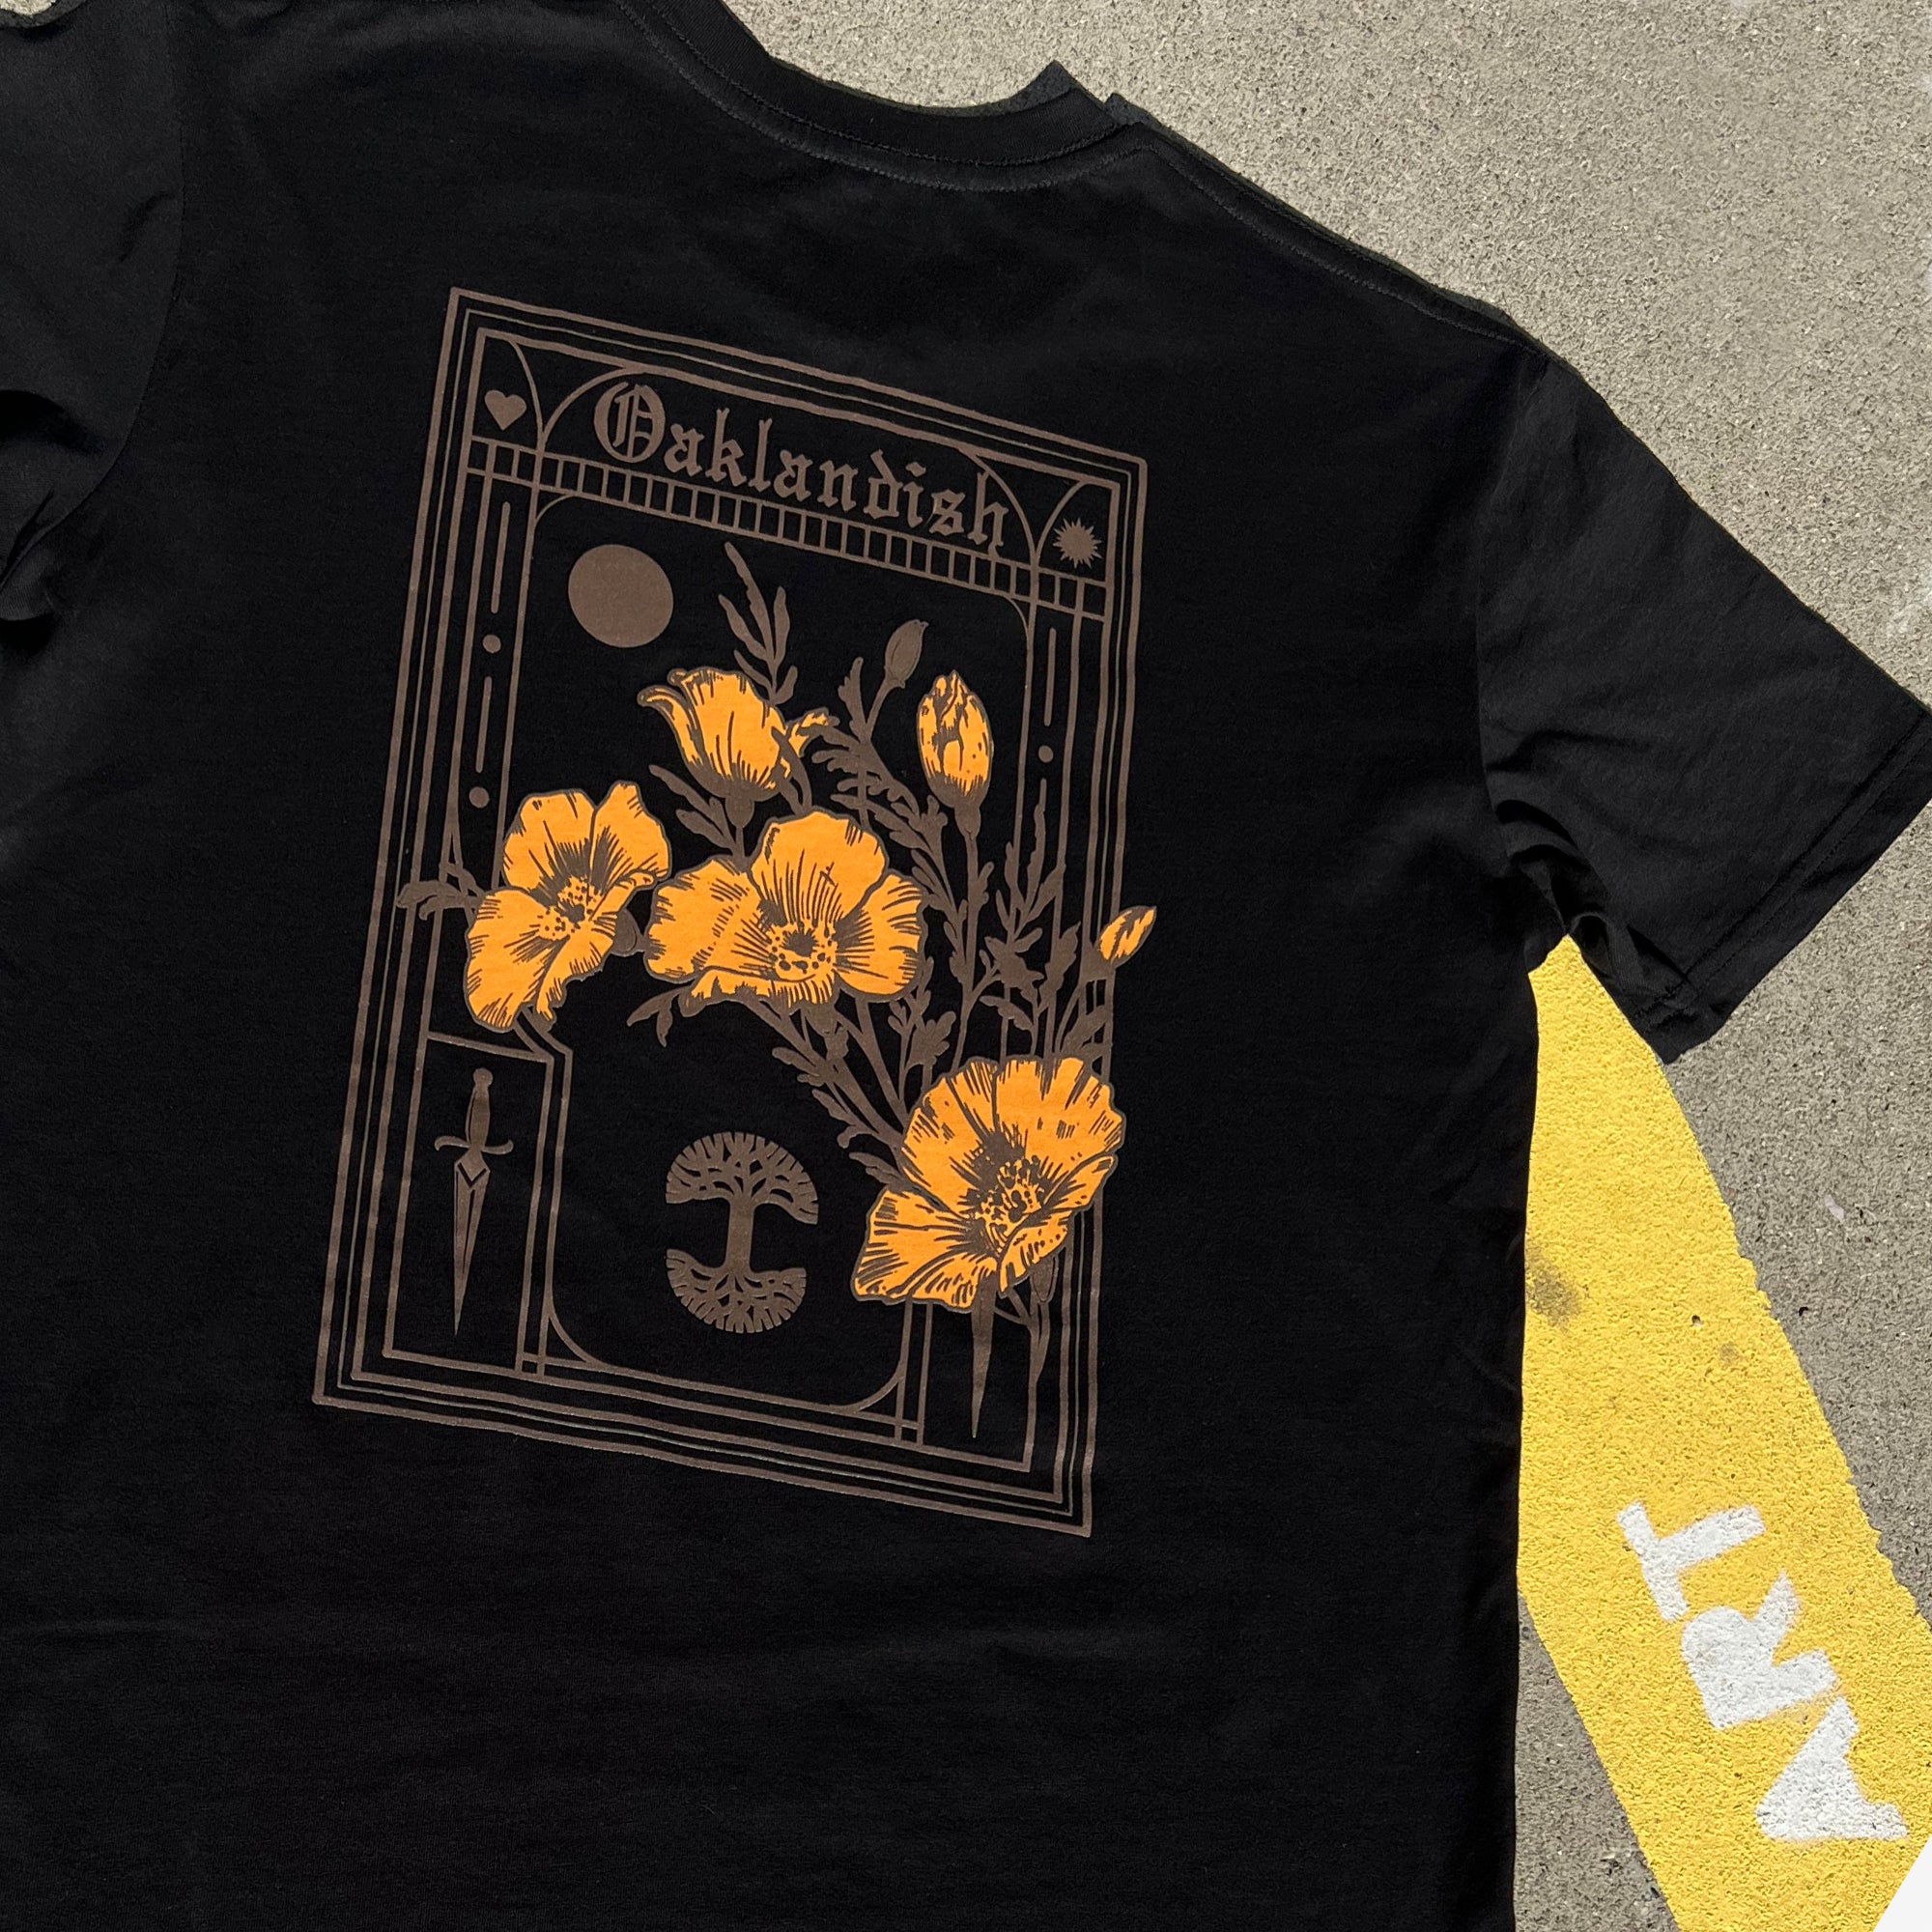 The back of a black cotton t-shirt with California poppies, an Oaklandish wordmark, and tree logo lying on the street.